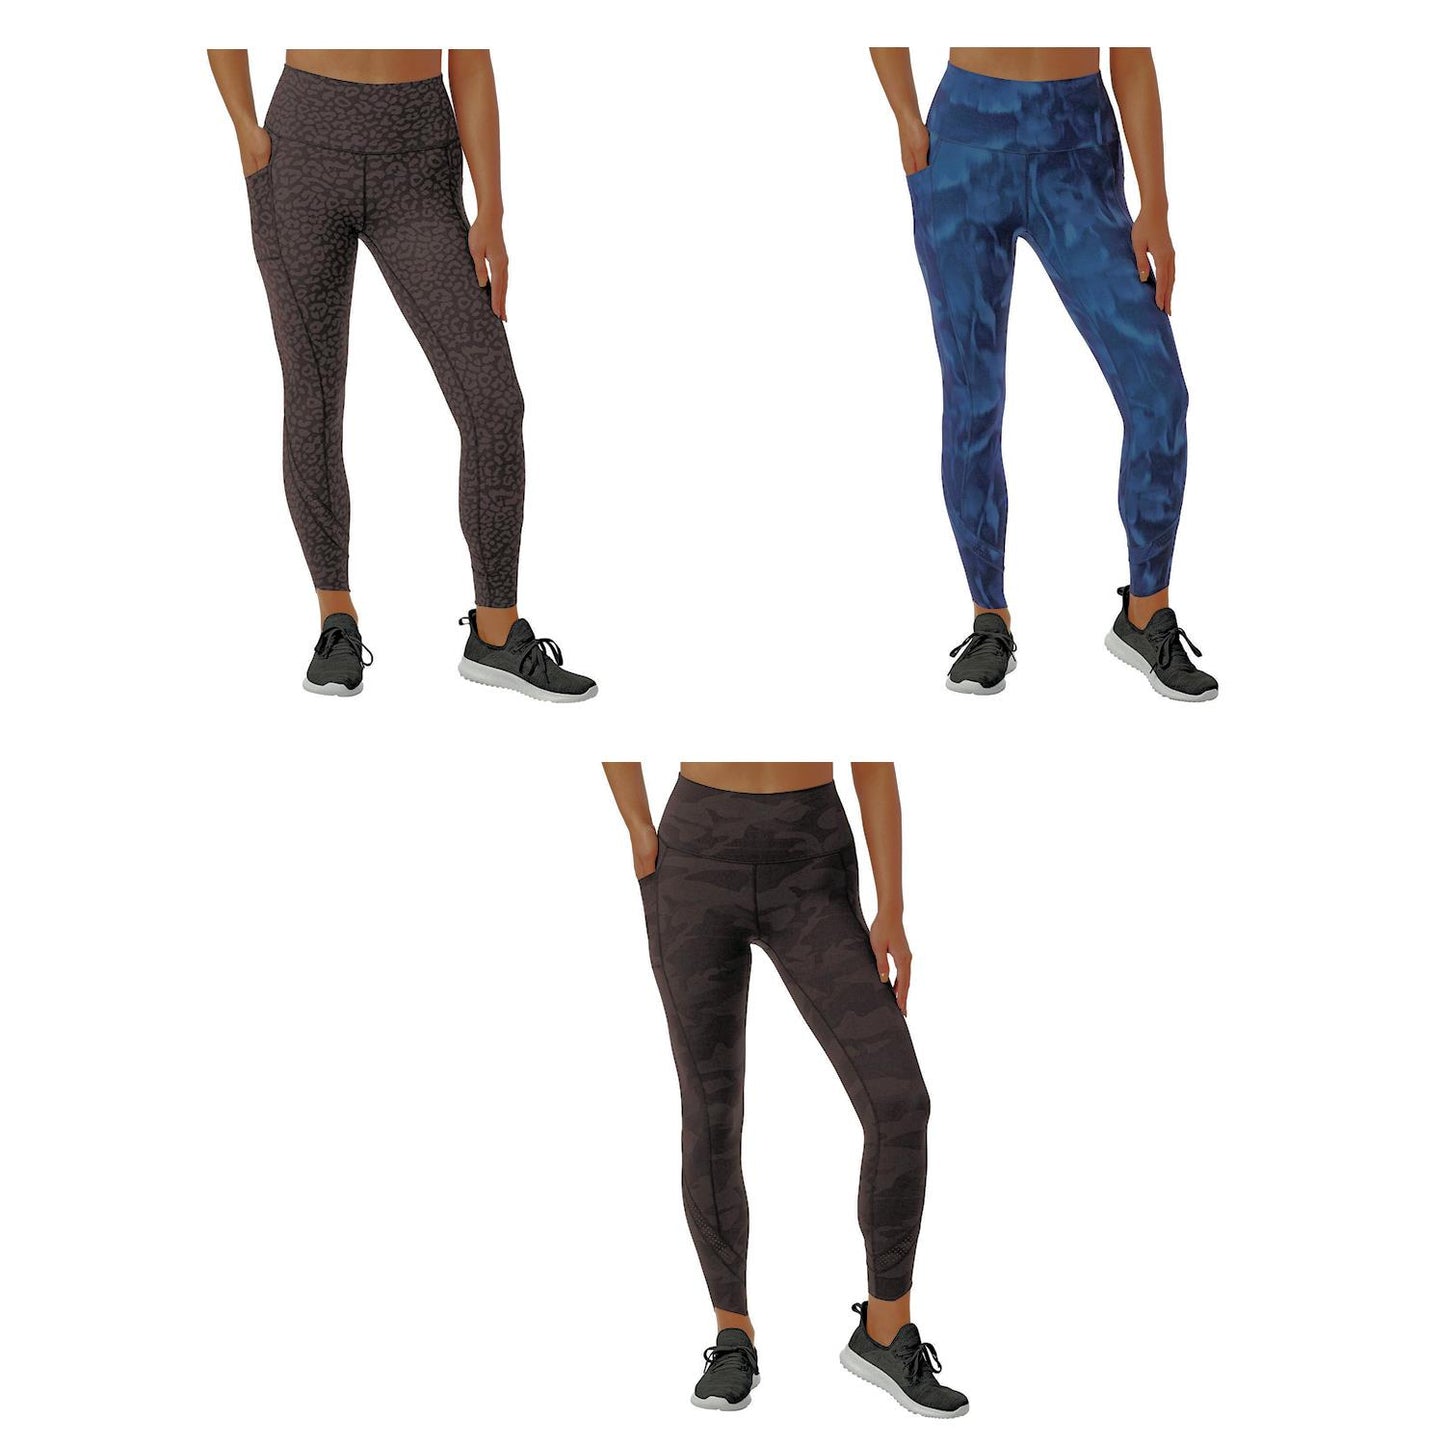 Zen Perforated Printed Hi Rise Ankle Legging with Pockets